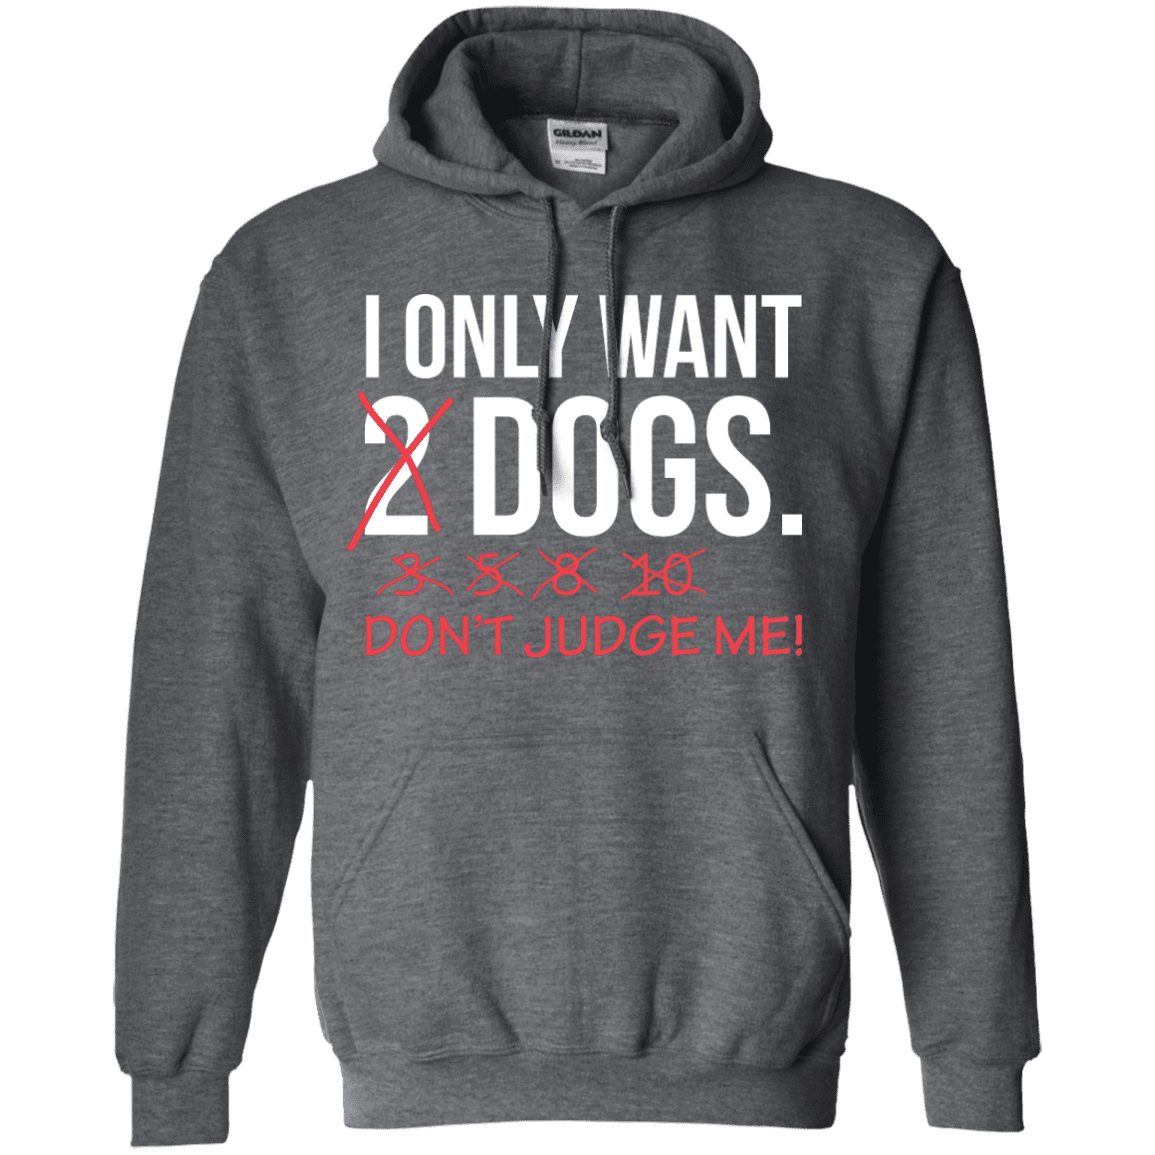 I Only Want 2 Dogs - Hoodie – Rescuers Club